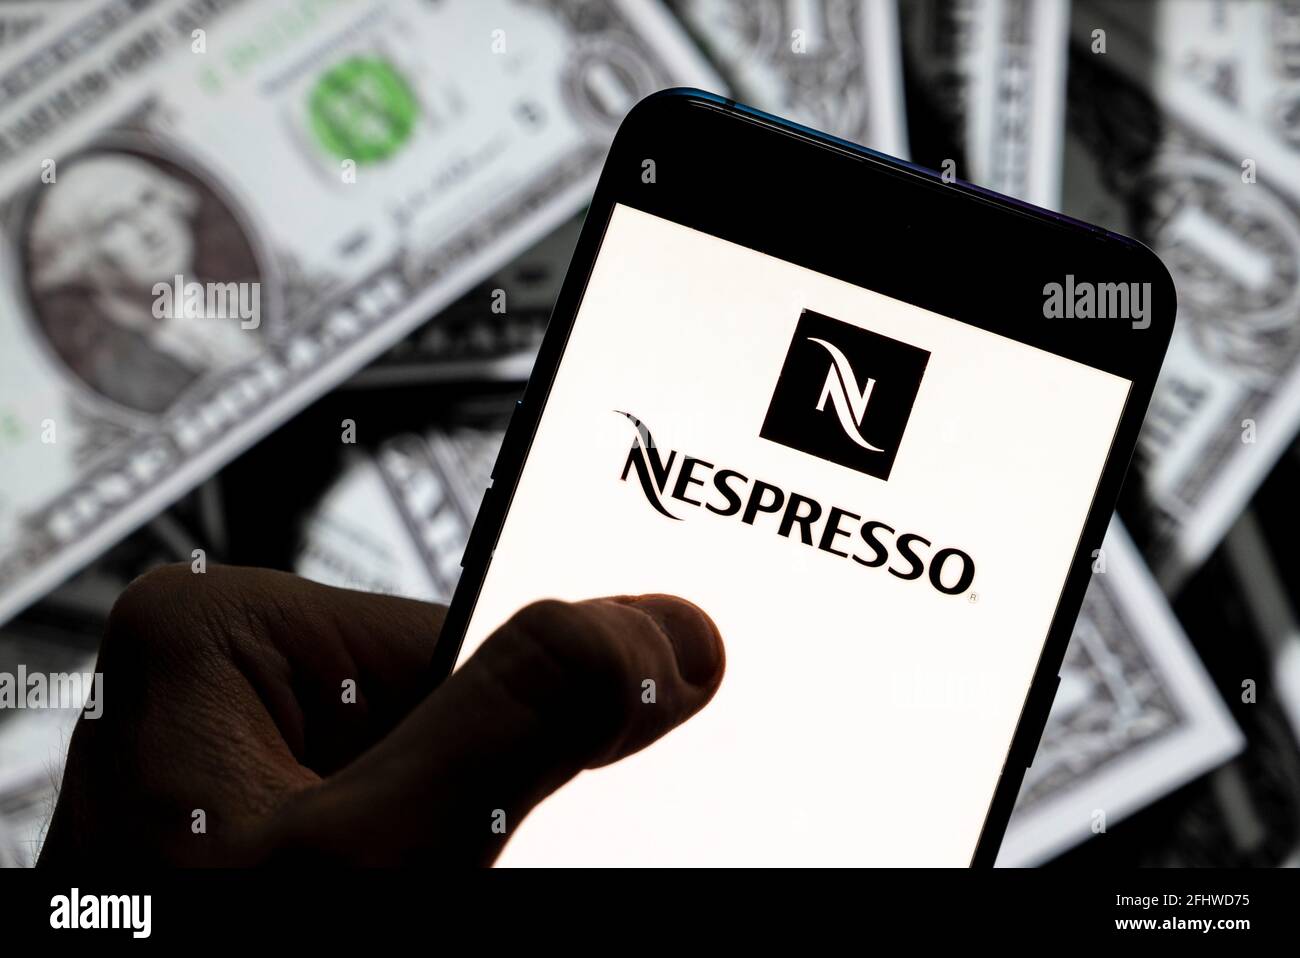 Nespresso Mobile High Resolution Stock Photography and Images - Alamy